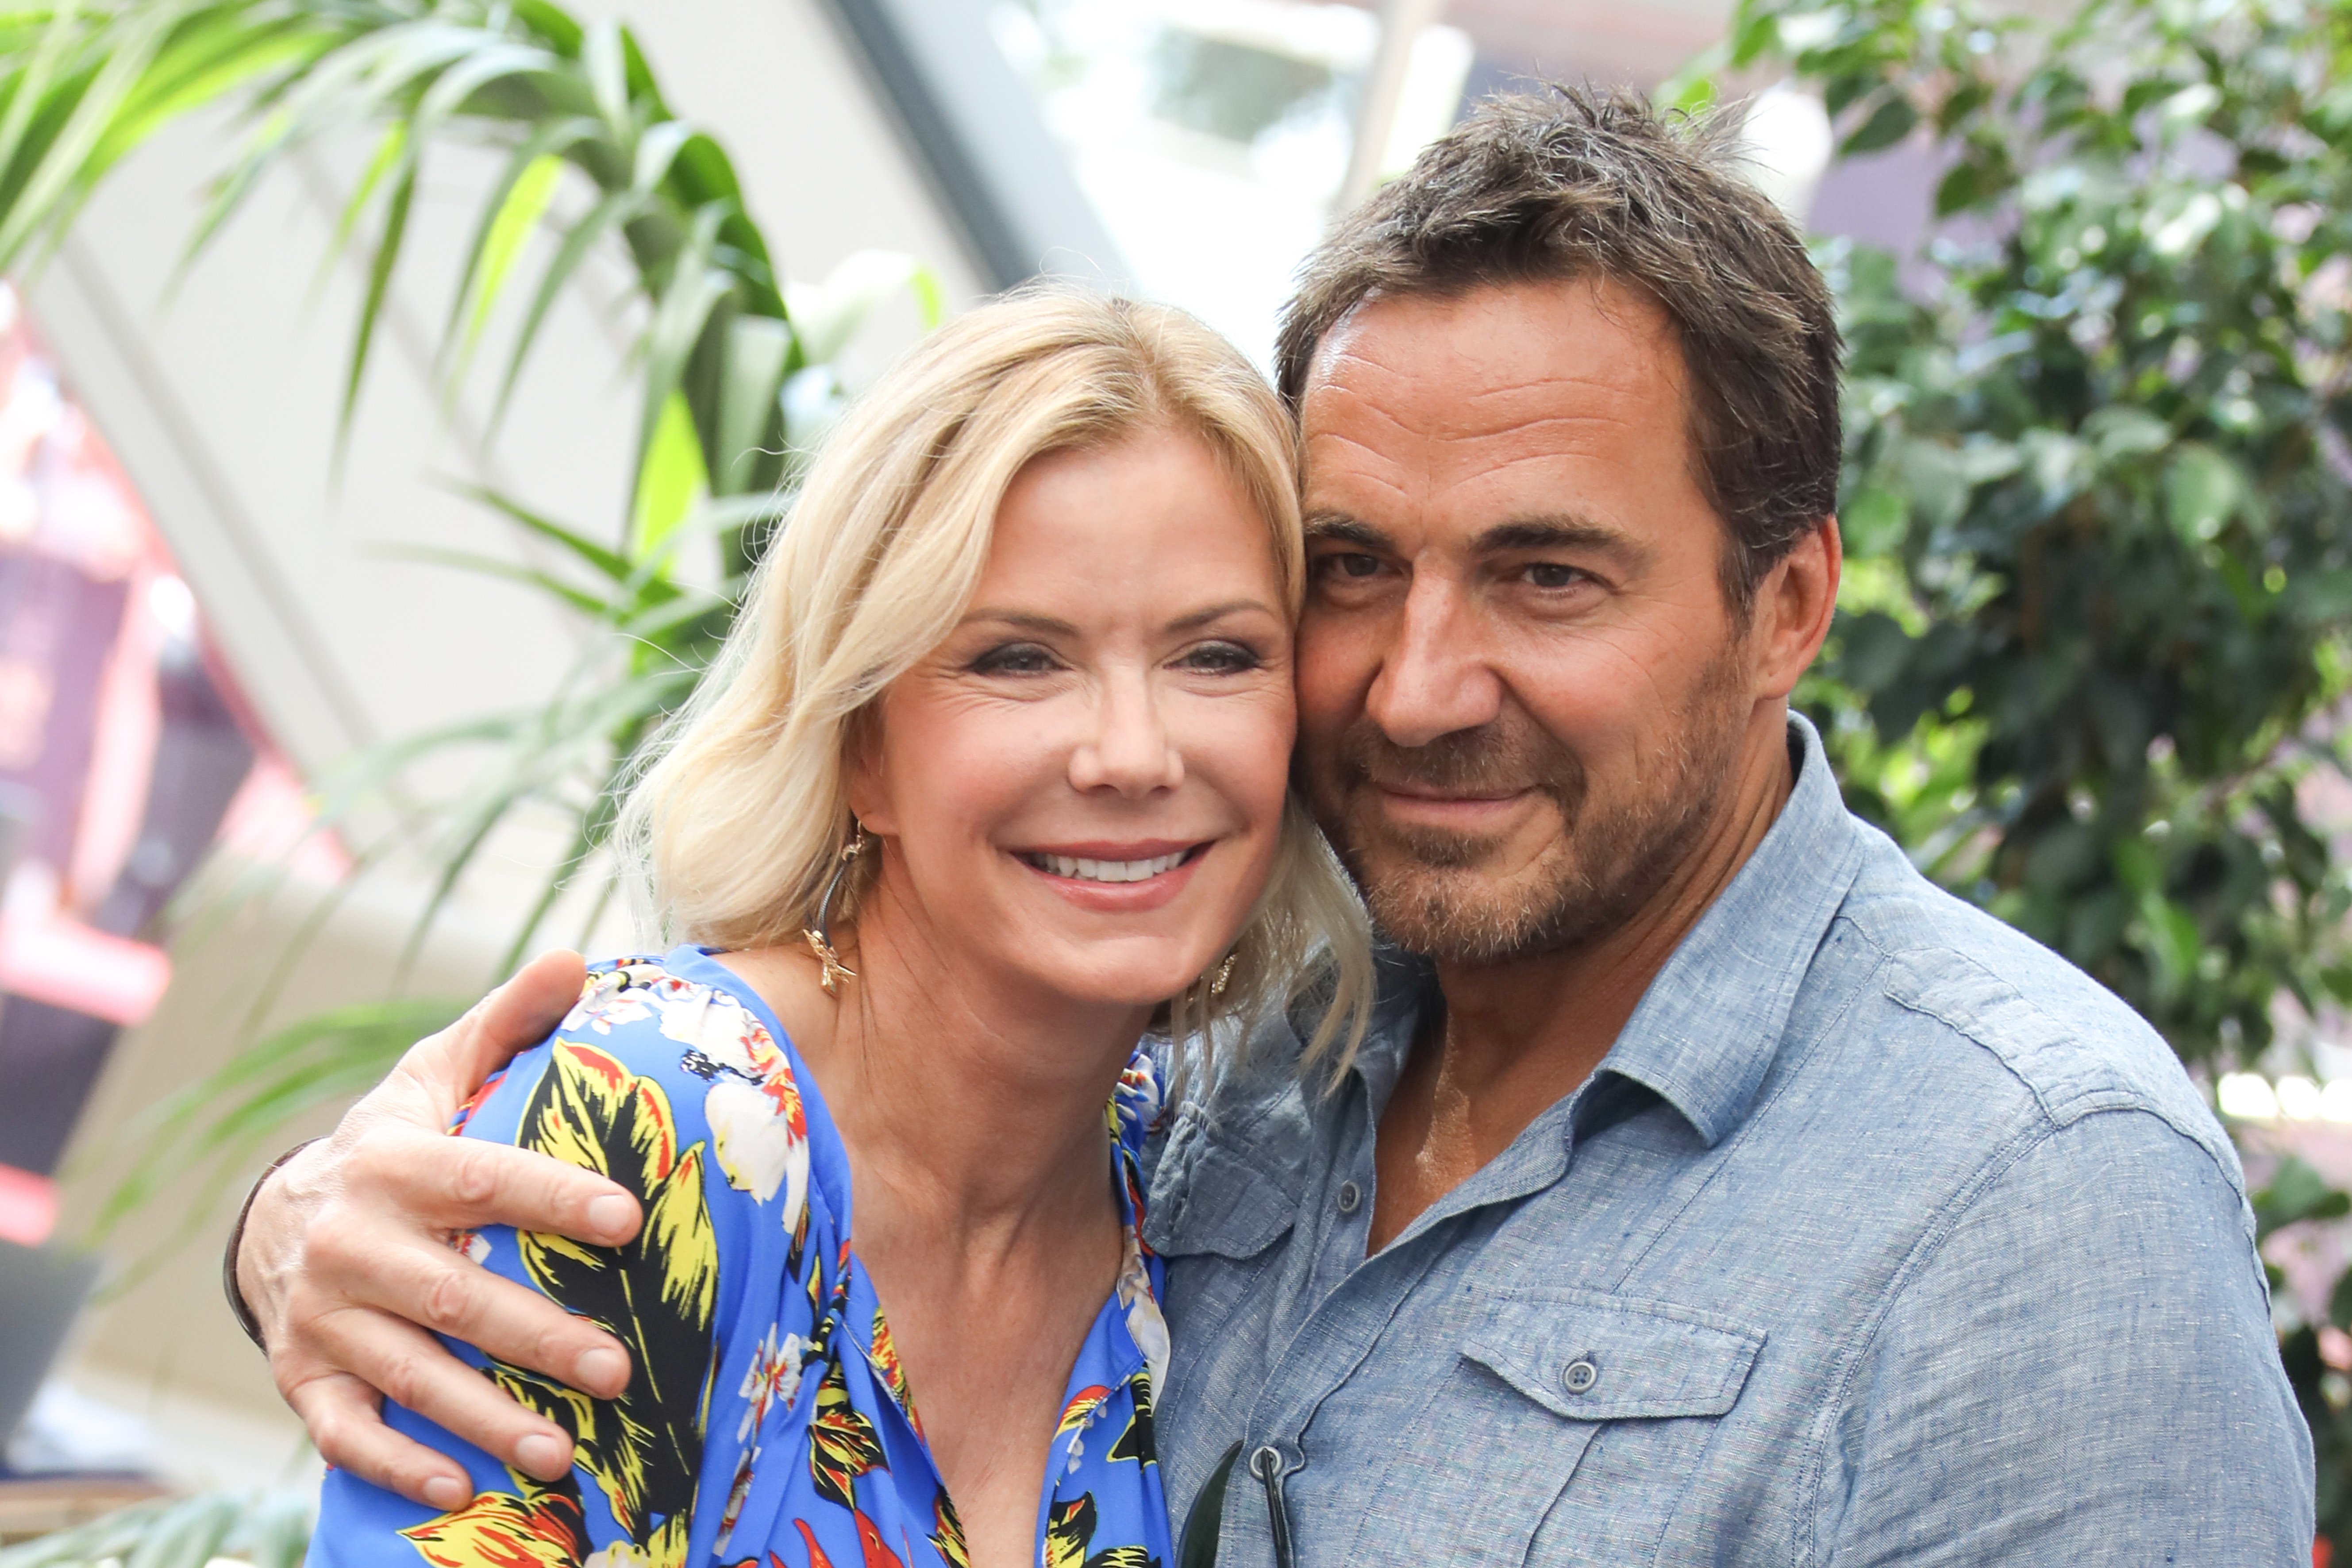 'The Bold and the Beautiful' actor Katherine Kelly Lang in a blue floral dress, and Thorsten Kaye in a blue shirt, share a hug.